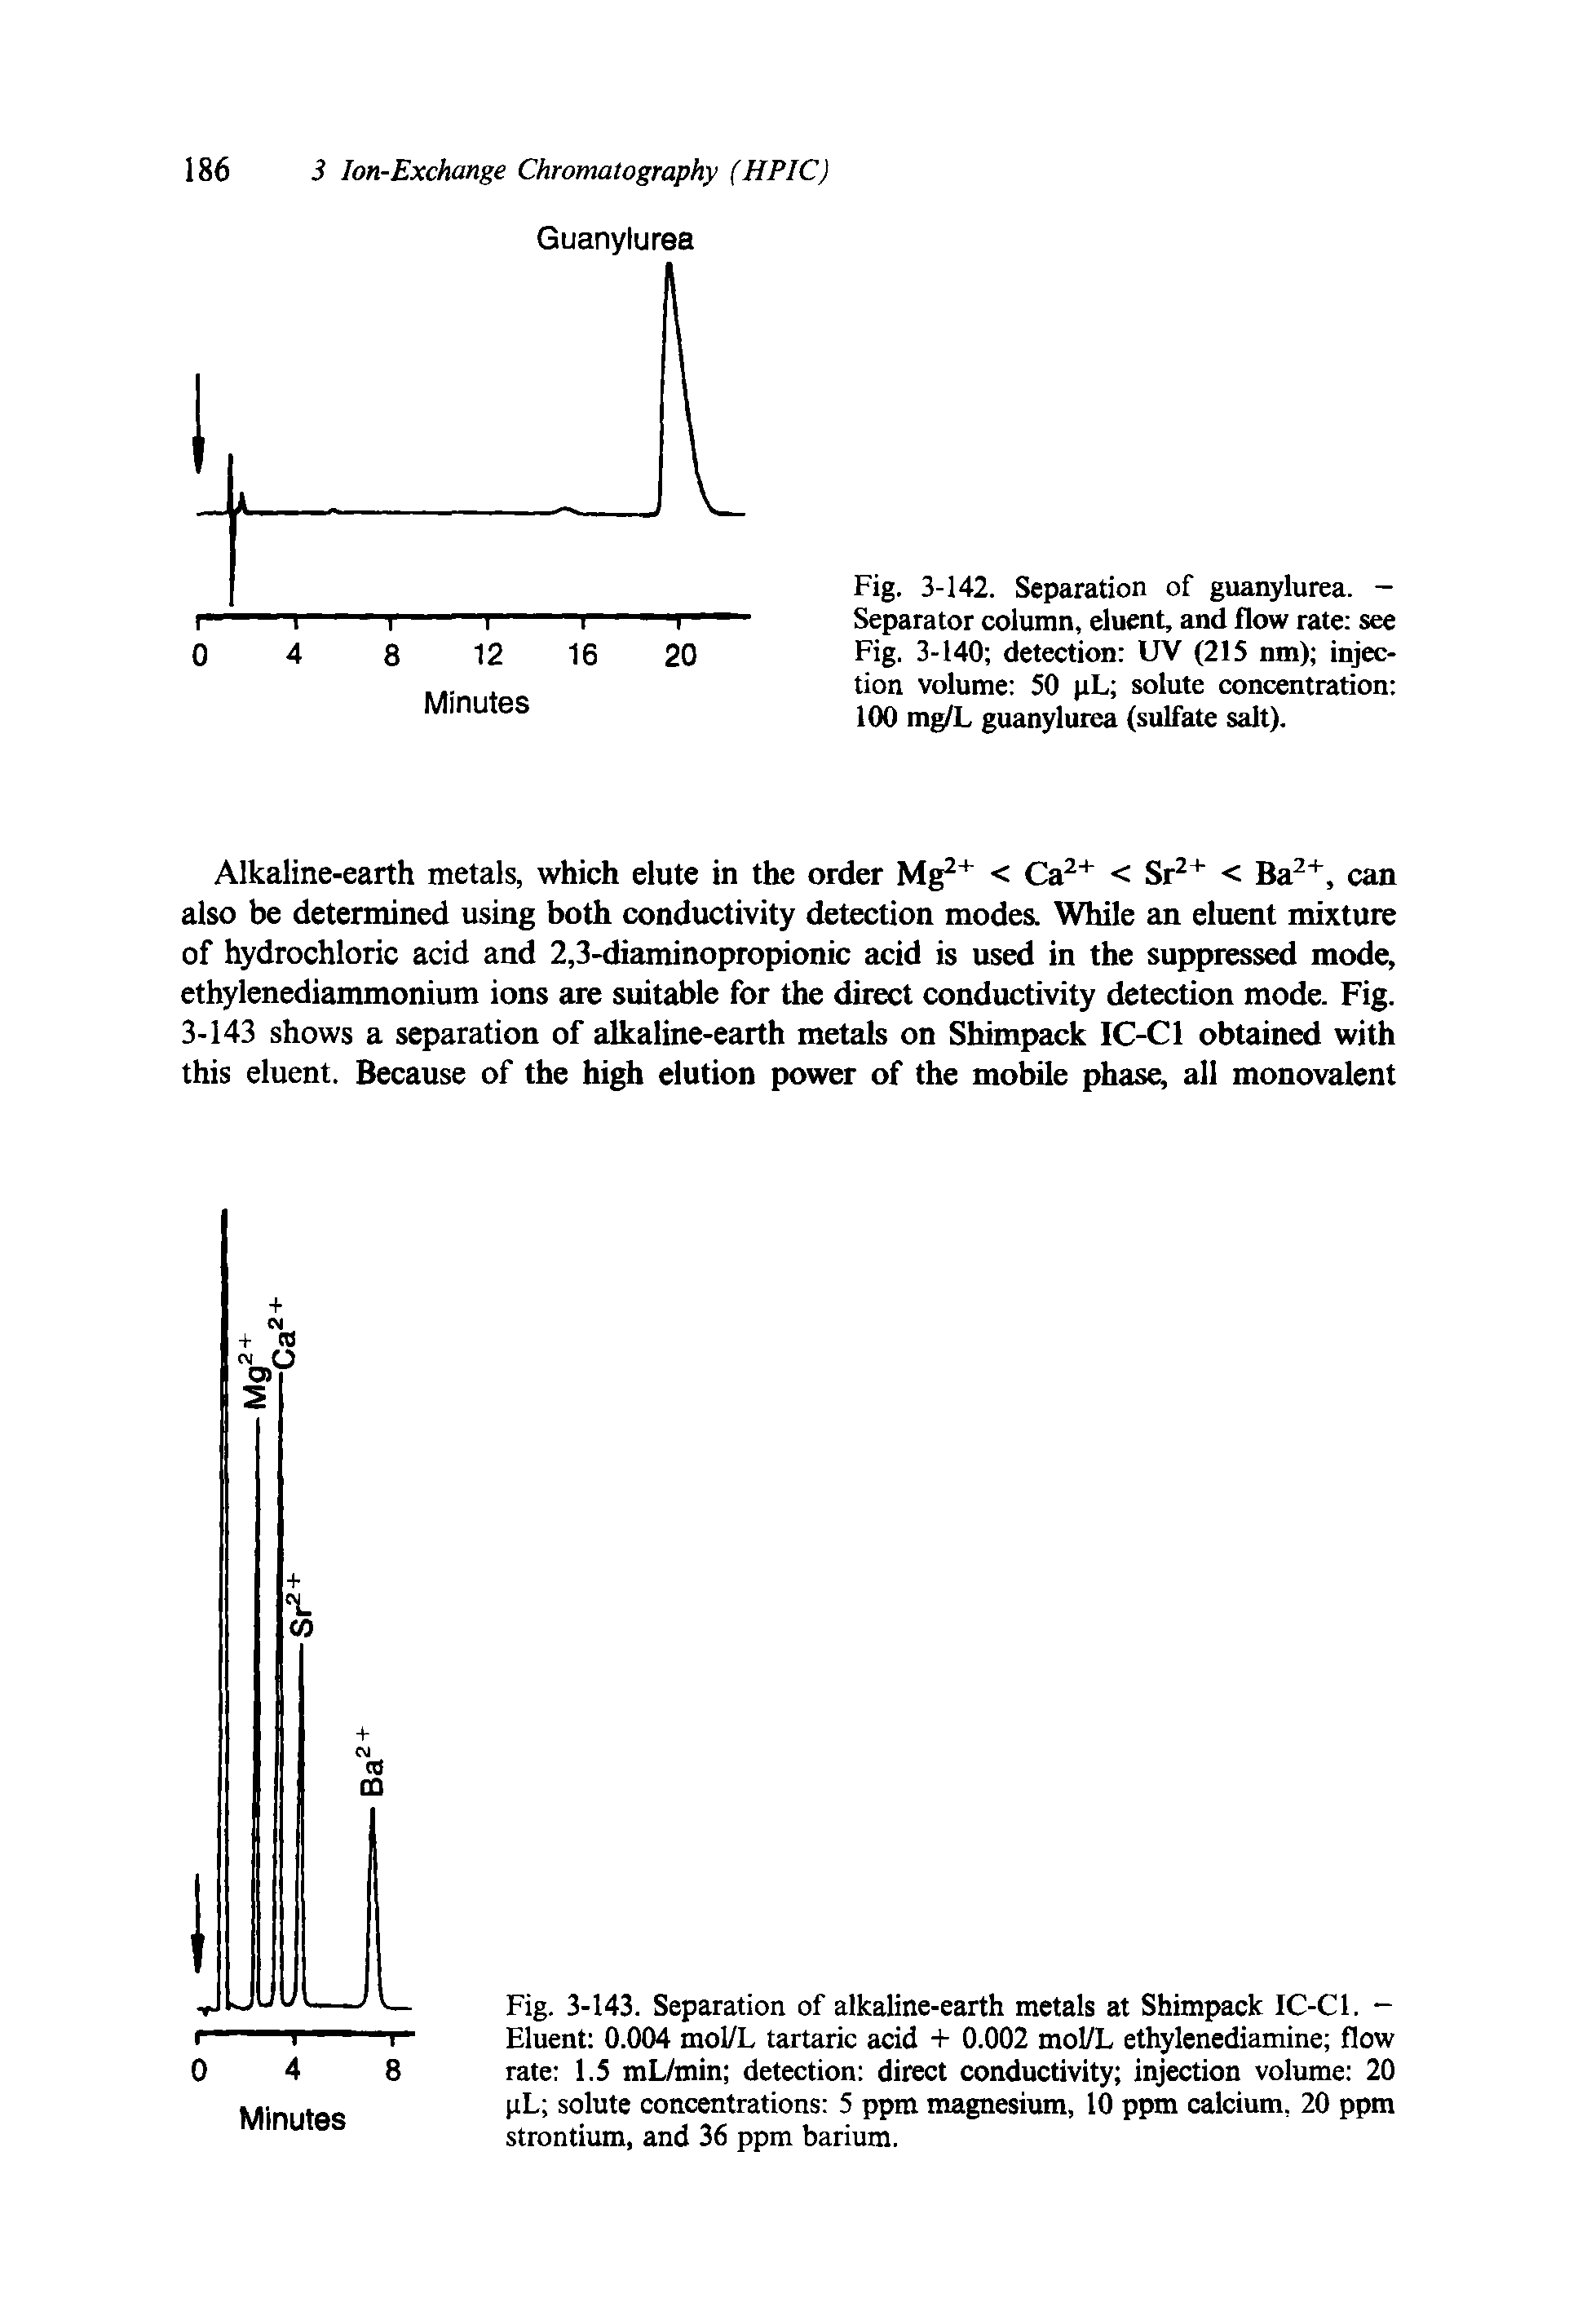 Fig. 3-142. Separation of guanylurea. -Separator column, eluent, and flow rate see Fig. 3-140 detection UV (215 nm) injection volume 50 pL solute concentration 100 mg/L guanylurea (sulfate salt).